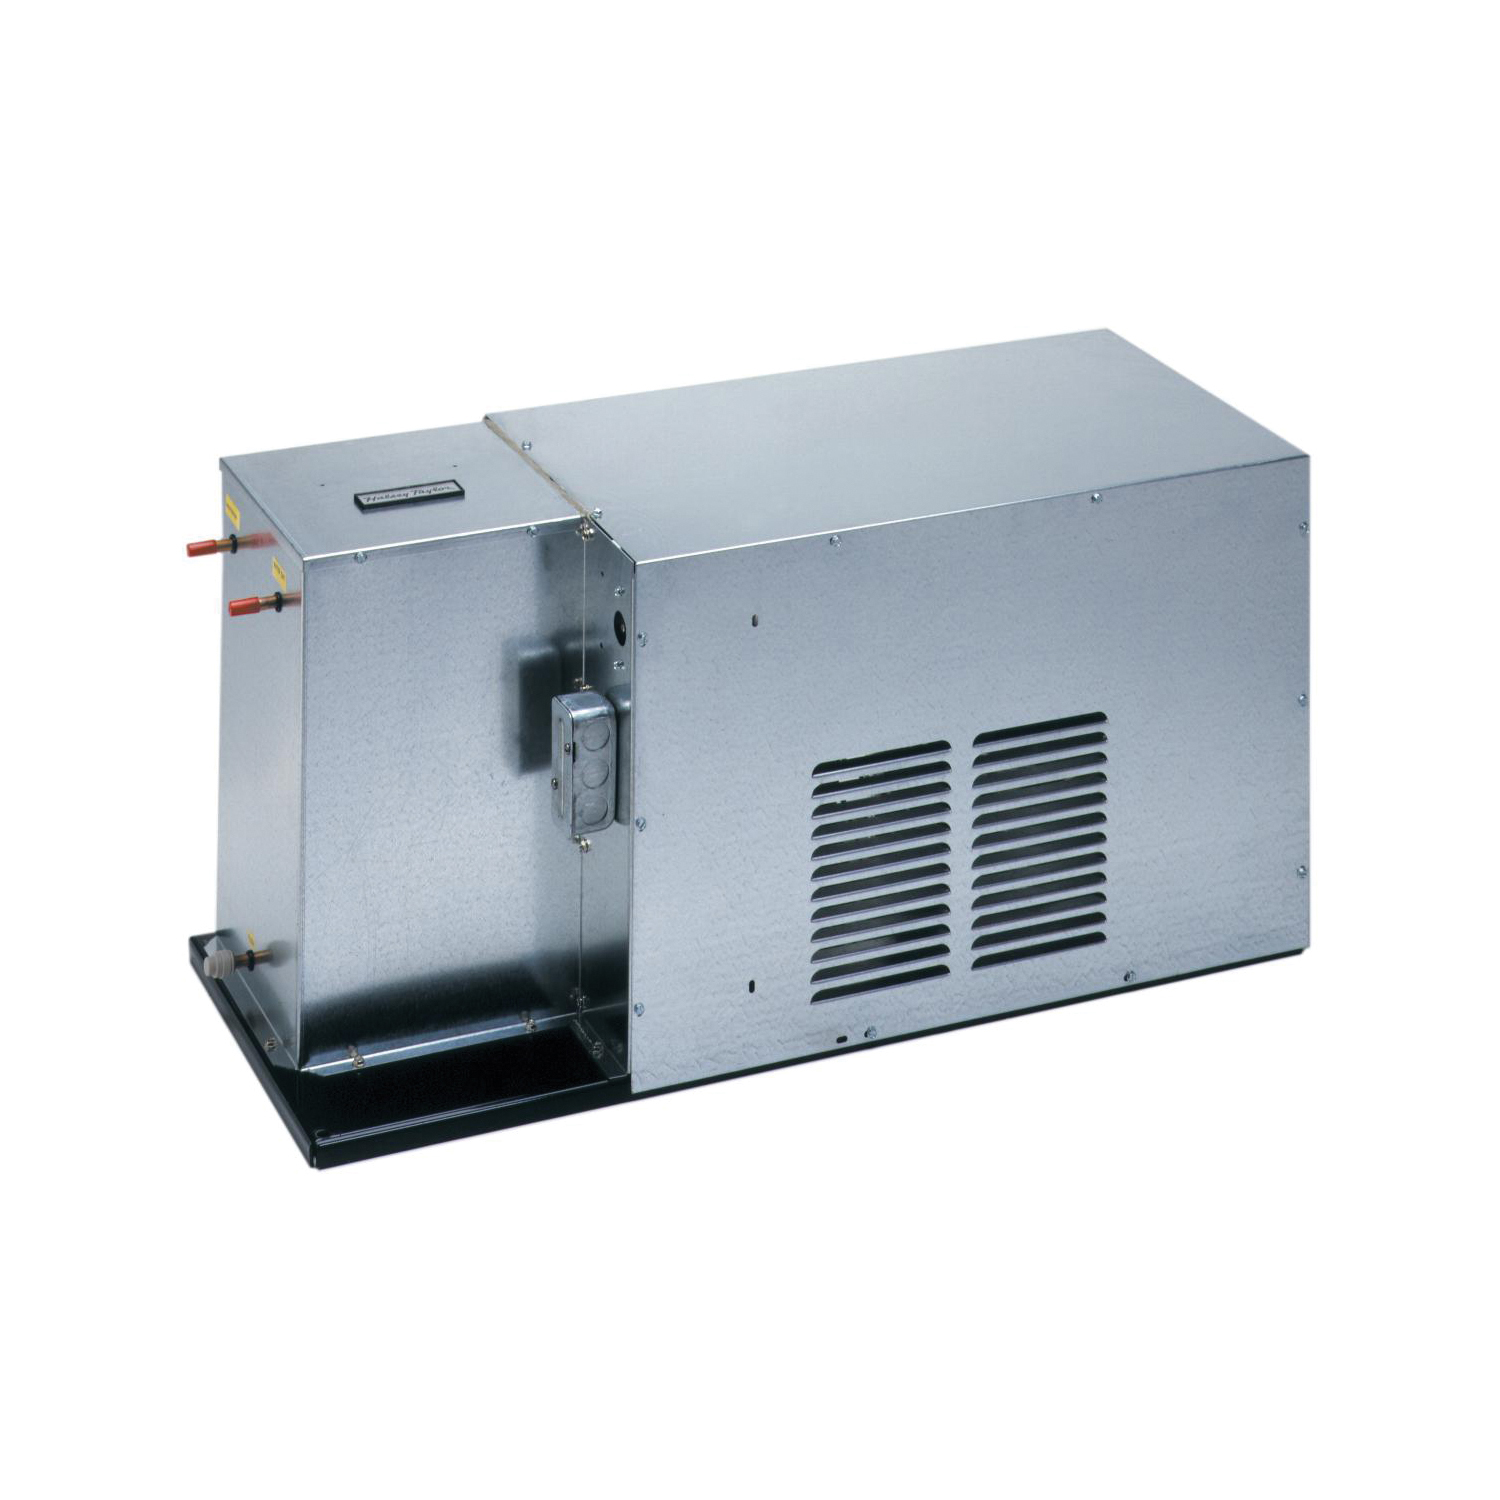 Halsey Taylor® SJ32W Non-Filtered Remote Chiller, 32 gph Cooling, 115 VAC, 16 A, Domestic